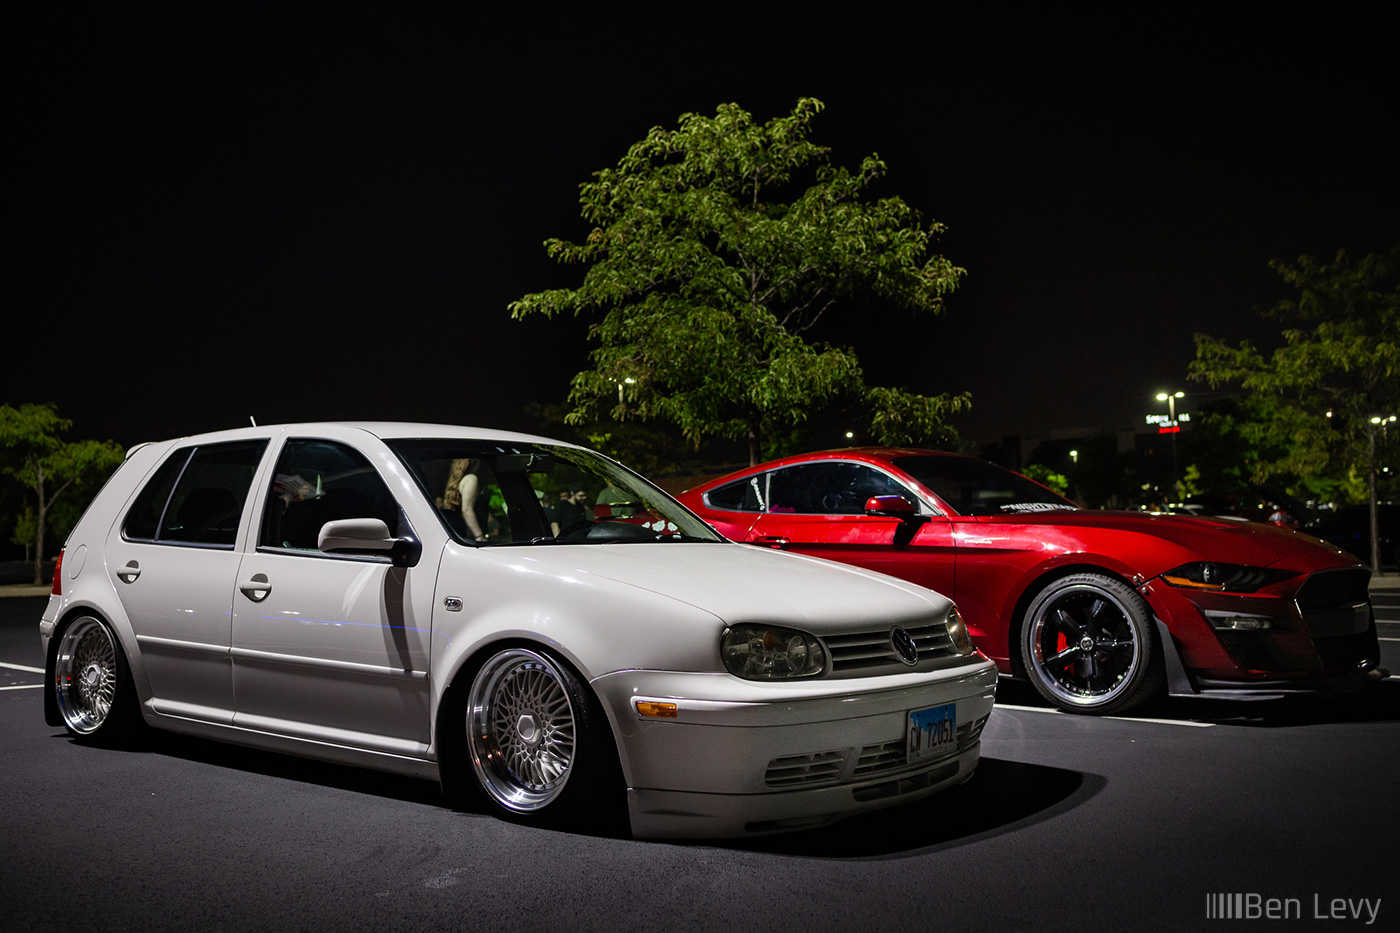 Vw Gold and Ford Mustang at Cars and Culture Meet